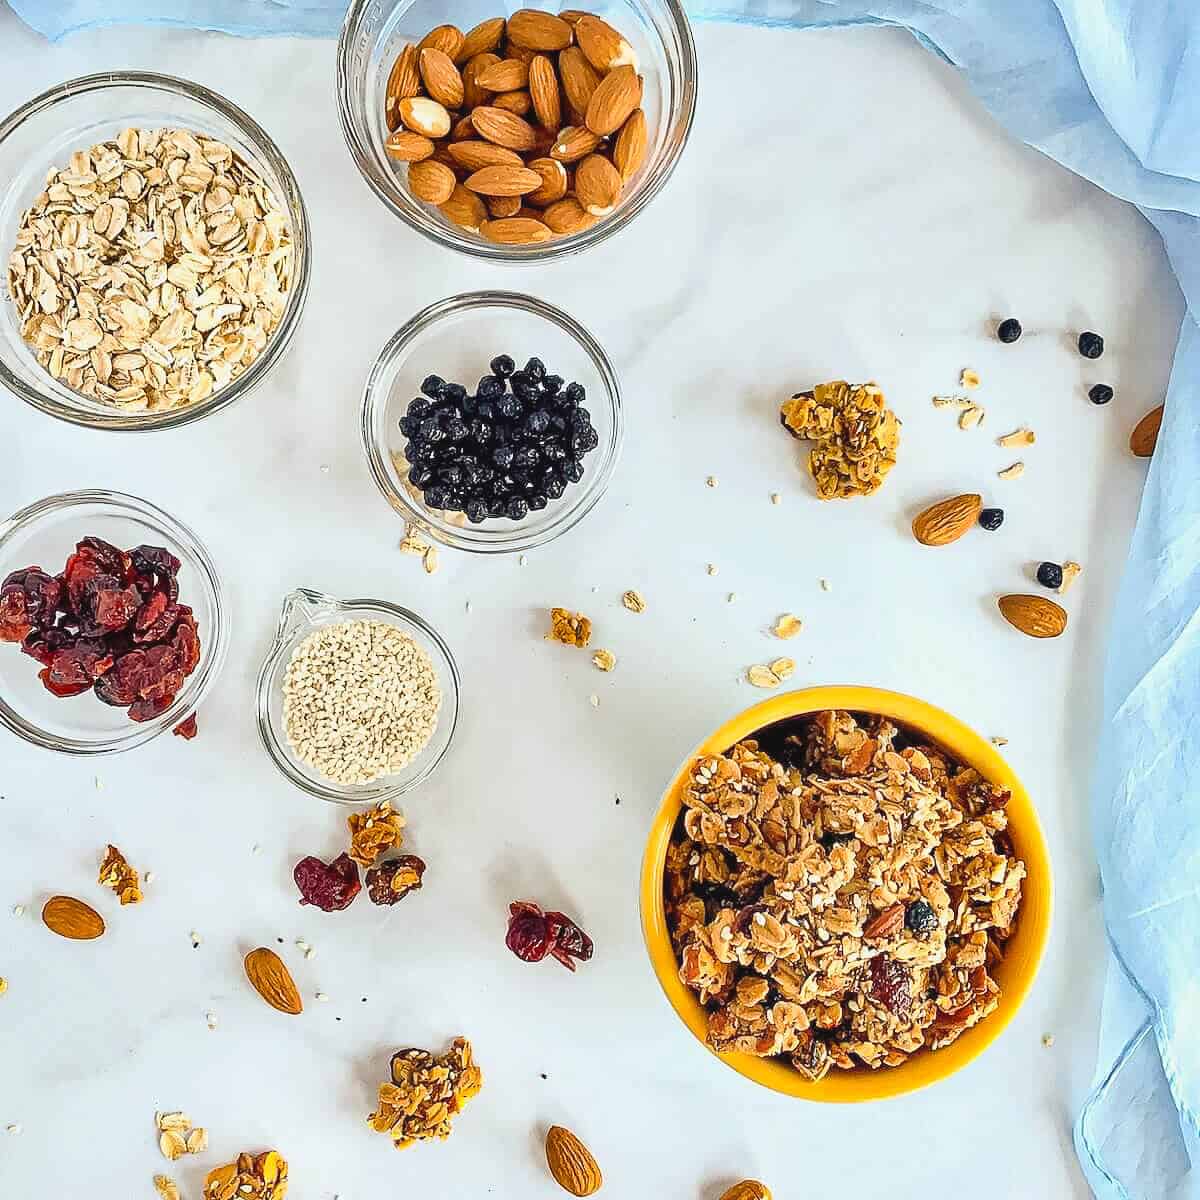 Granola in a bowl next to ingredients portioned into glass bowls from overhead.